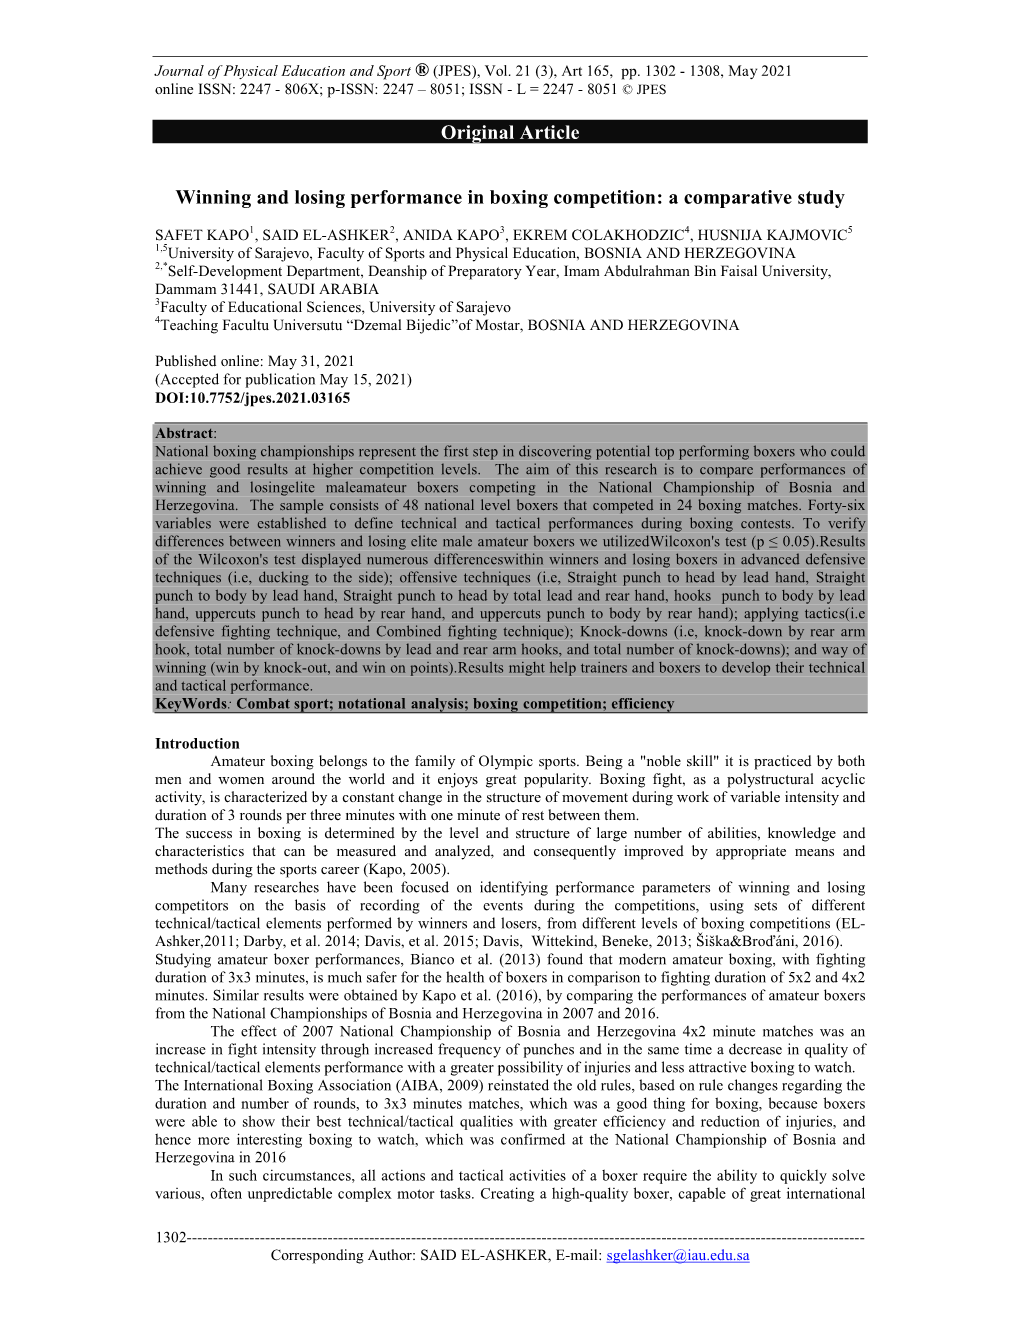 Original Article Winning and Losing Performance in Boxing Competition